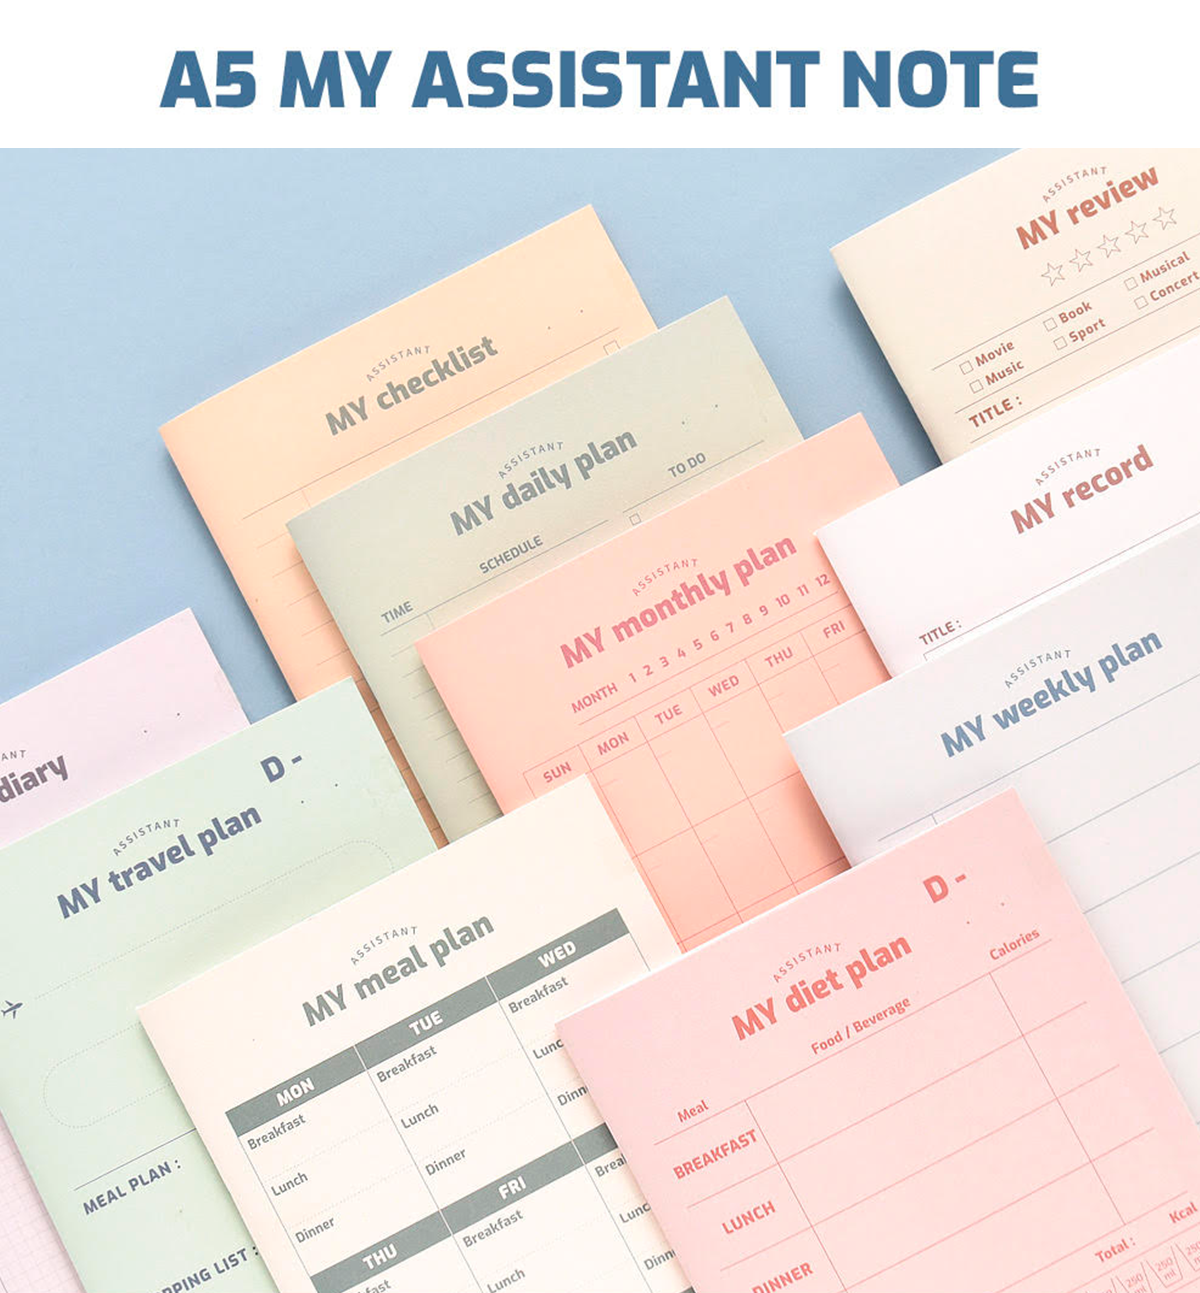 A5 My Assistant Note Plan